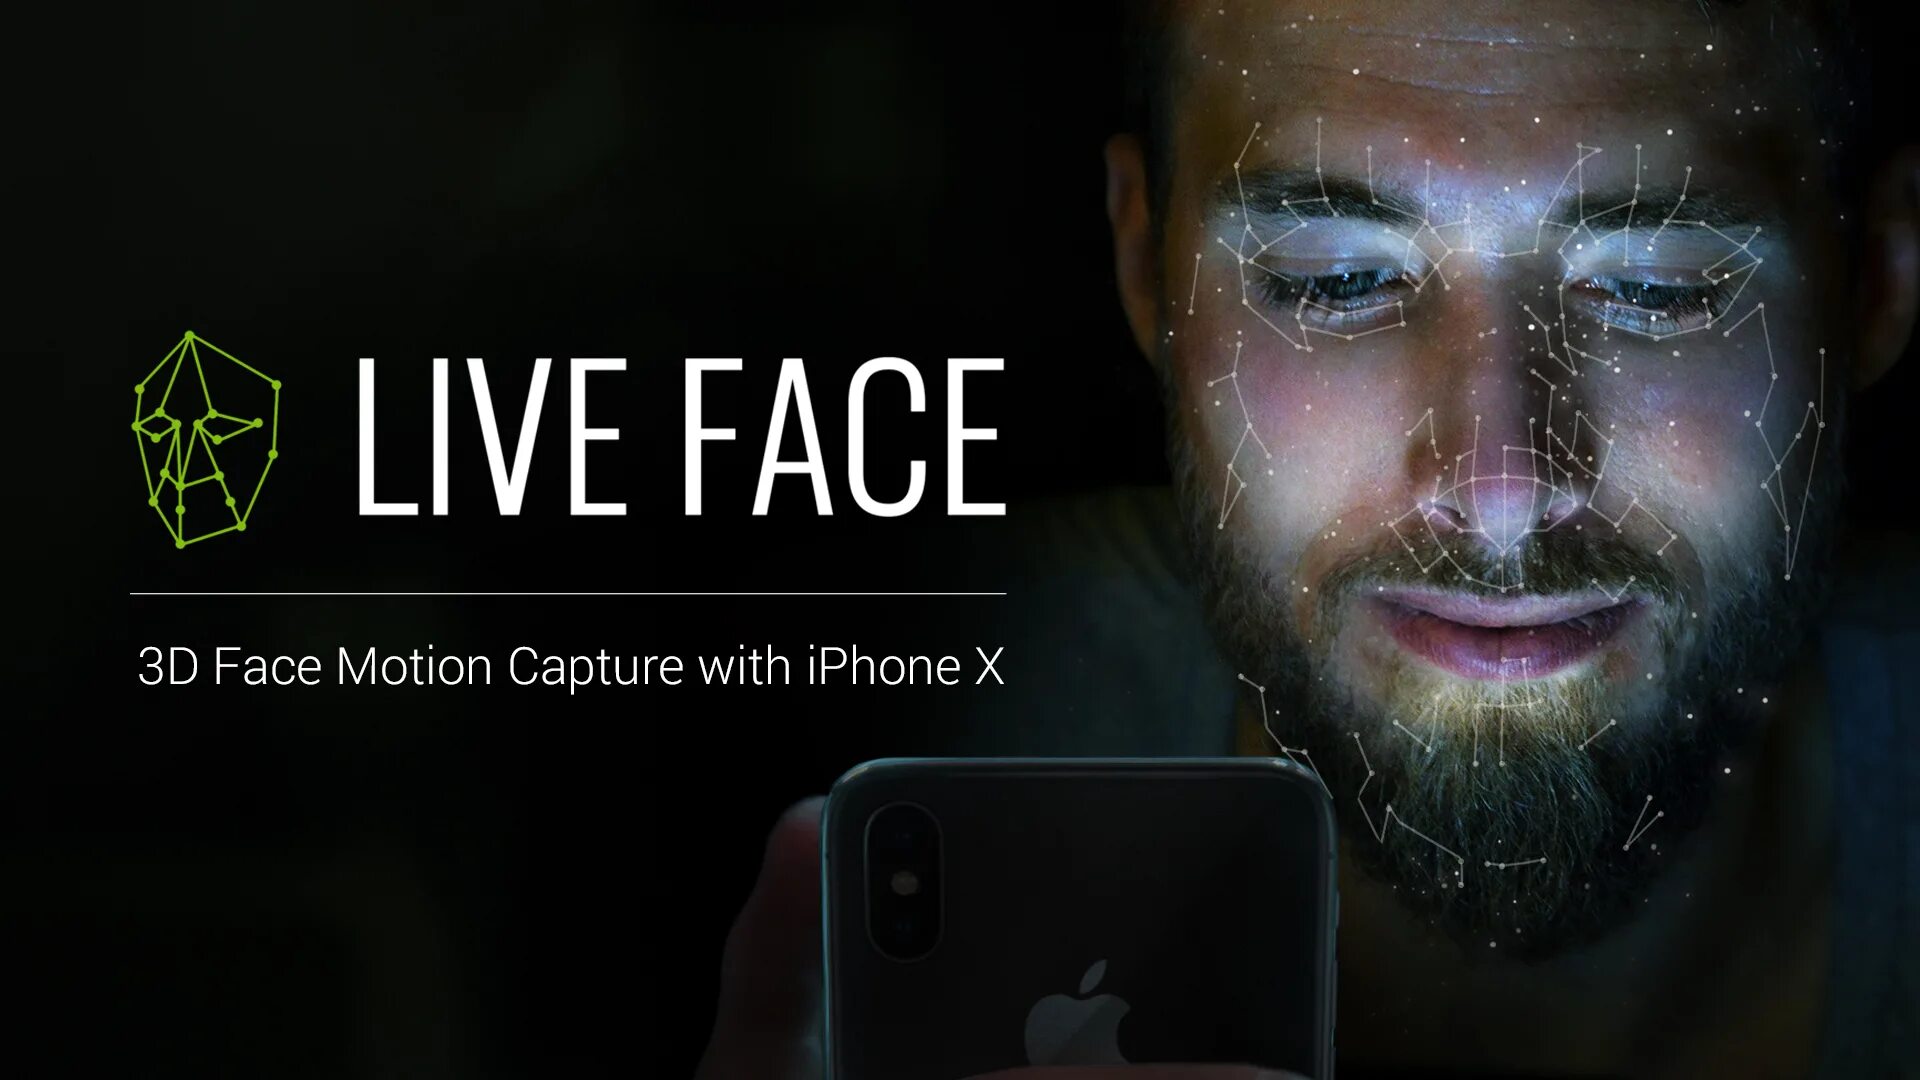 Арма на айфон. Iphone face Motion capture. Iphone facial capture. Iphone Mocap face capture. Live link face.